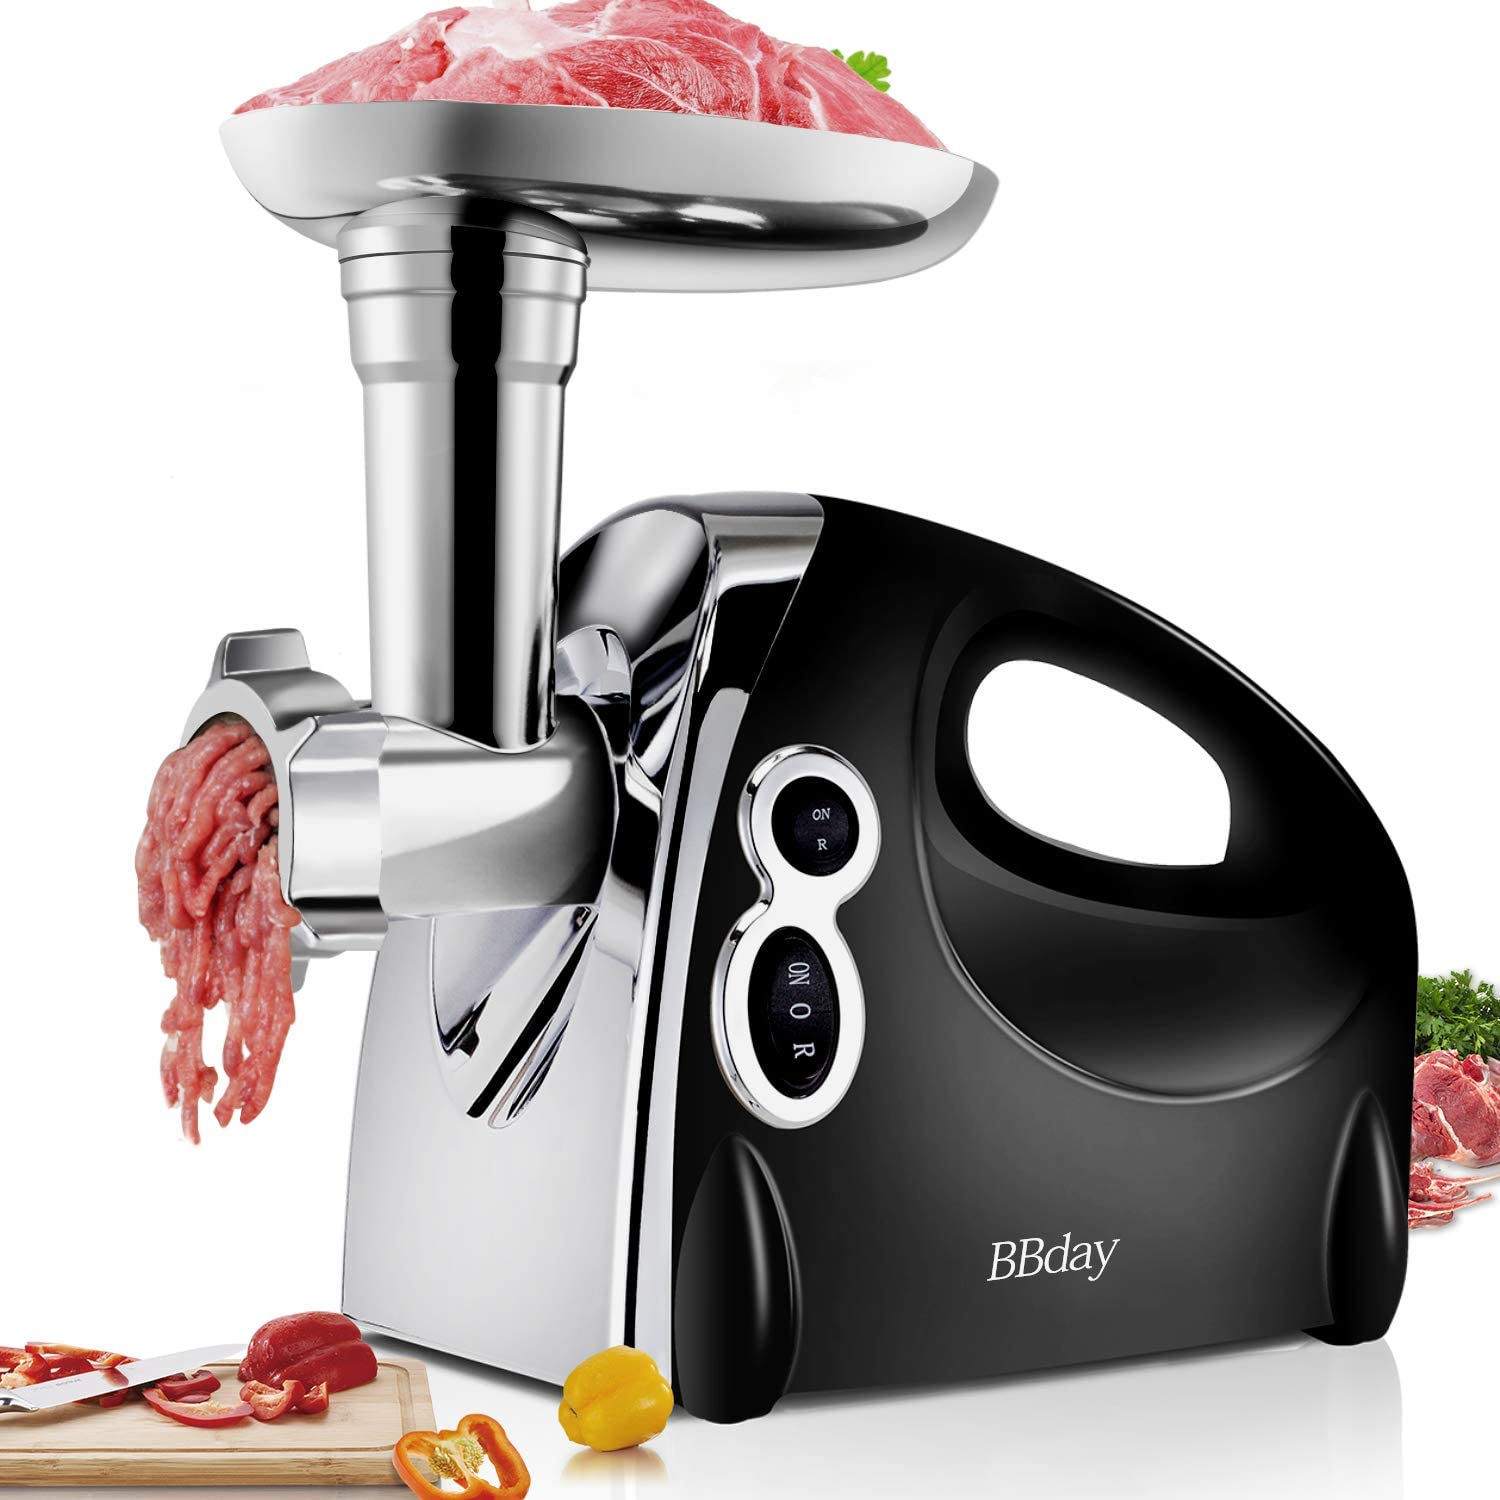 4. BBday Electric Meat Grinder